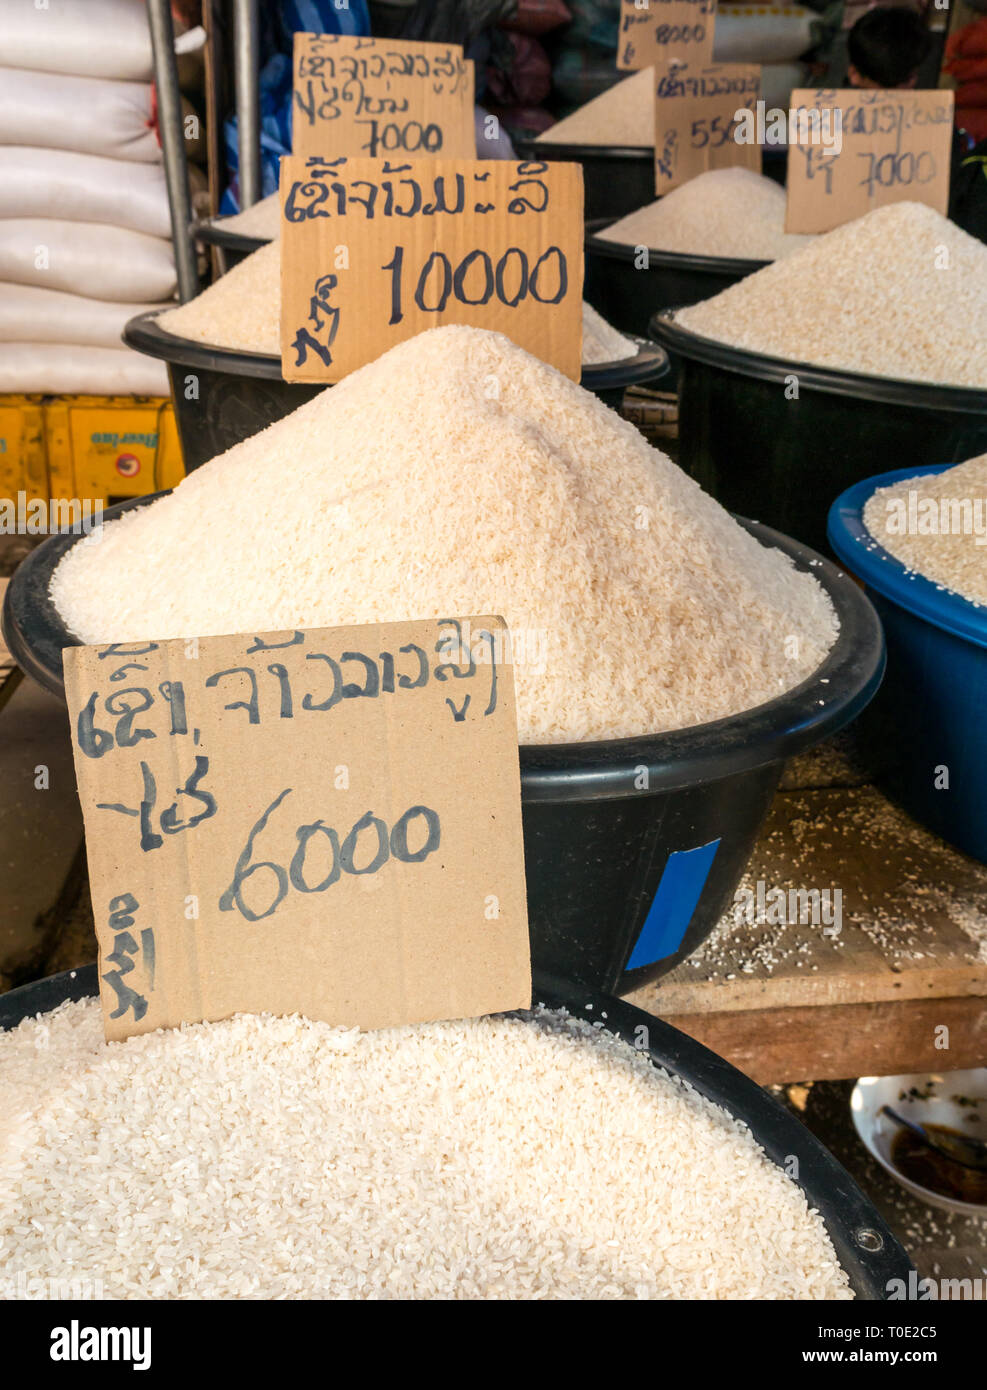 Buckets of rice varieties for sale at market stall, Phosy day market, Luang Prabang, Laos, SE Asia Stock Photo